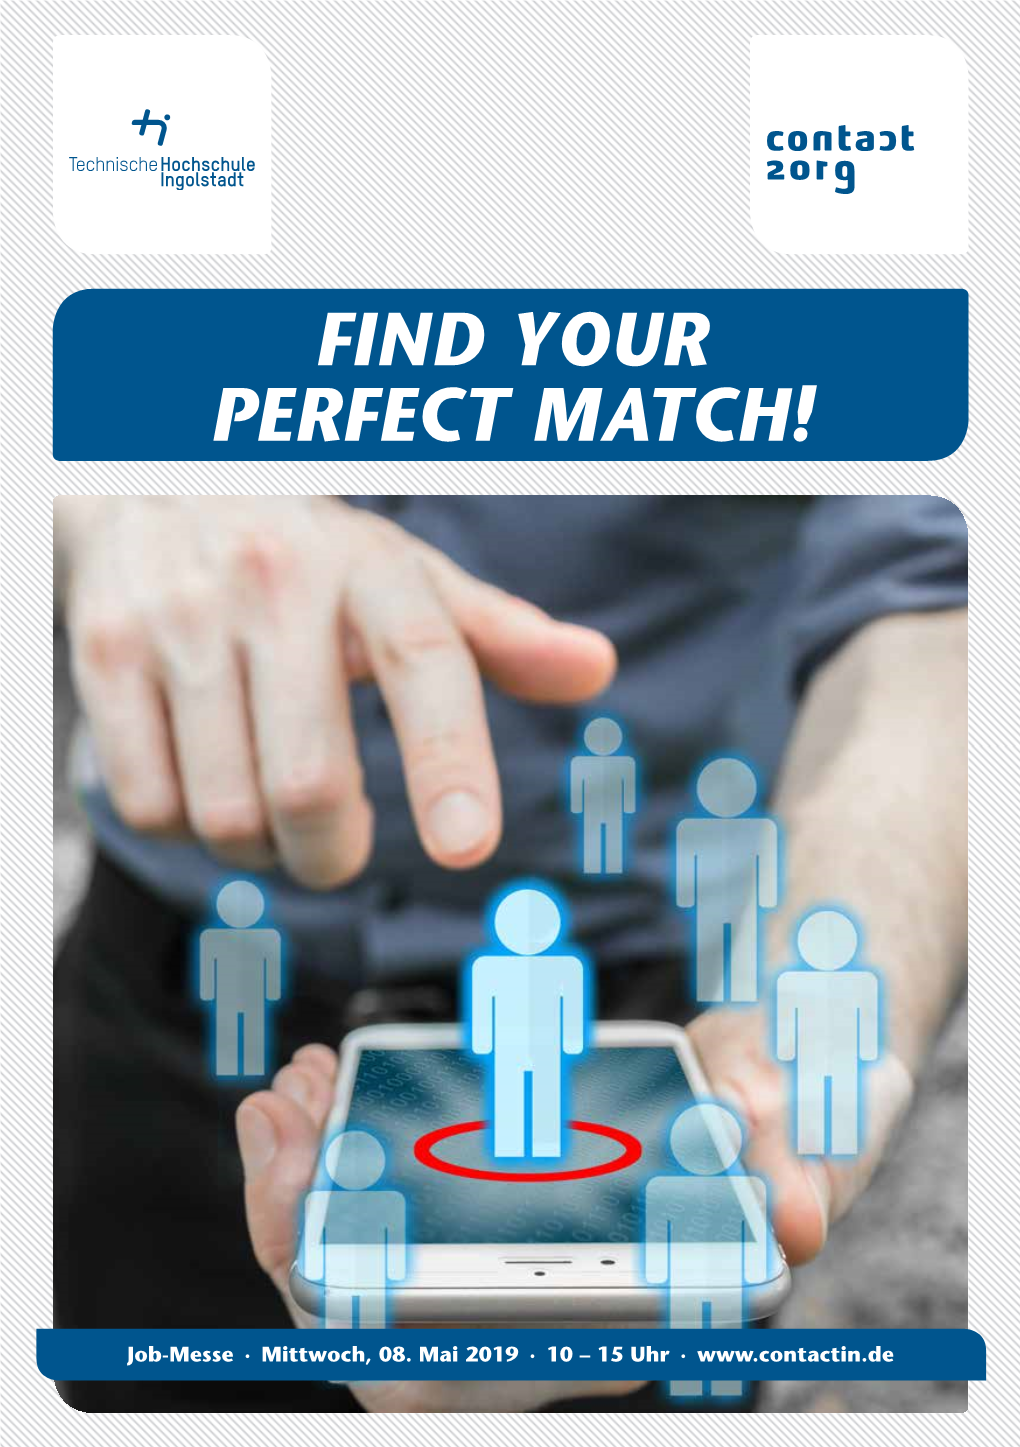 Find Your Perfect Match!